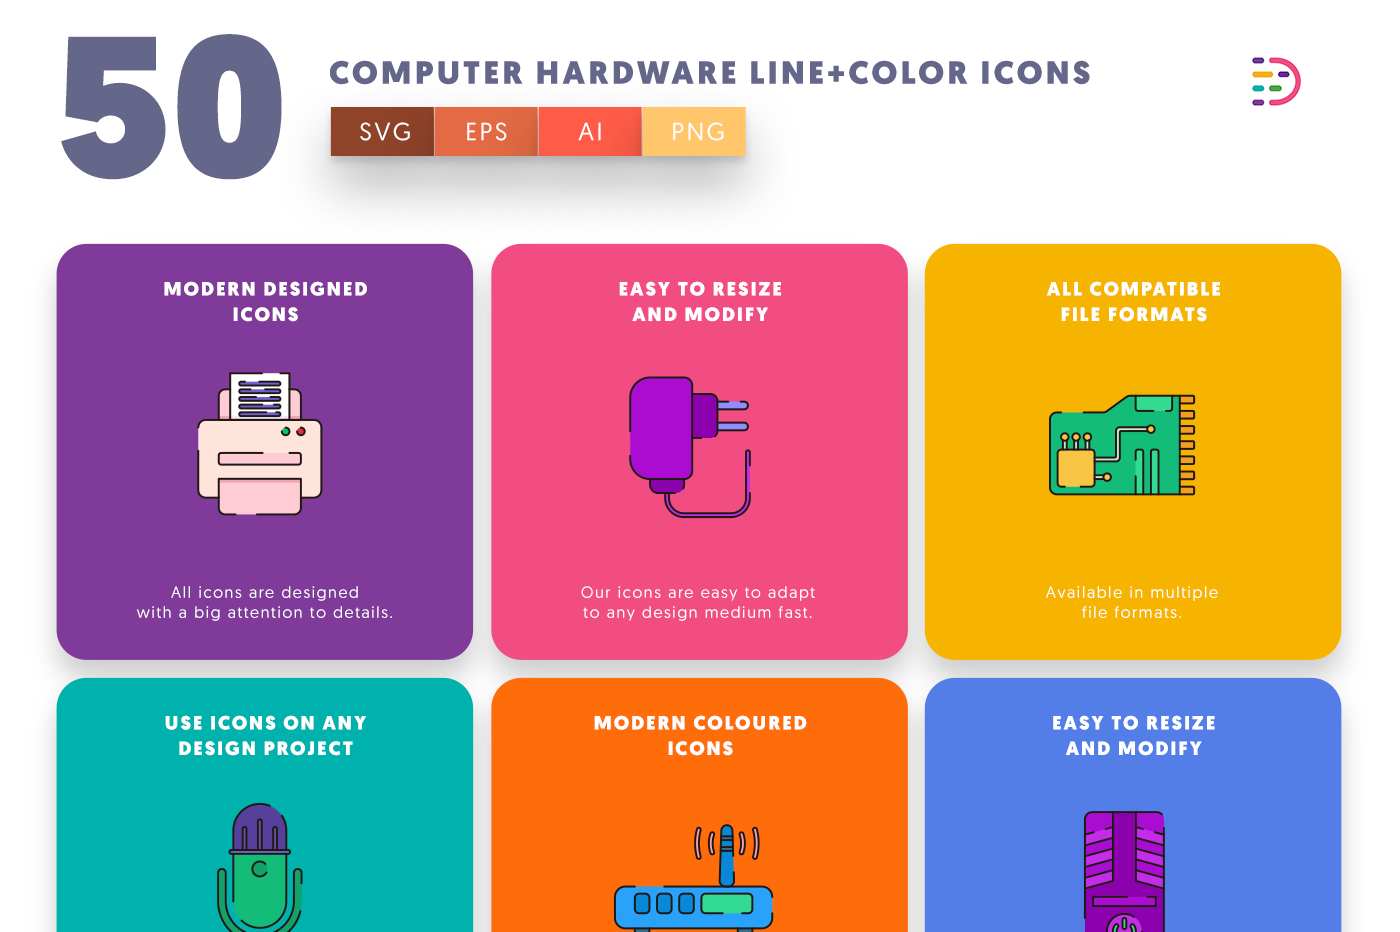 Computer Hardware Line and Color Icons with colored backgrounds 